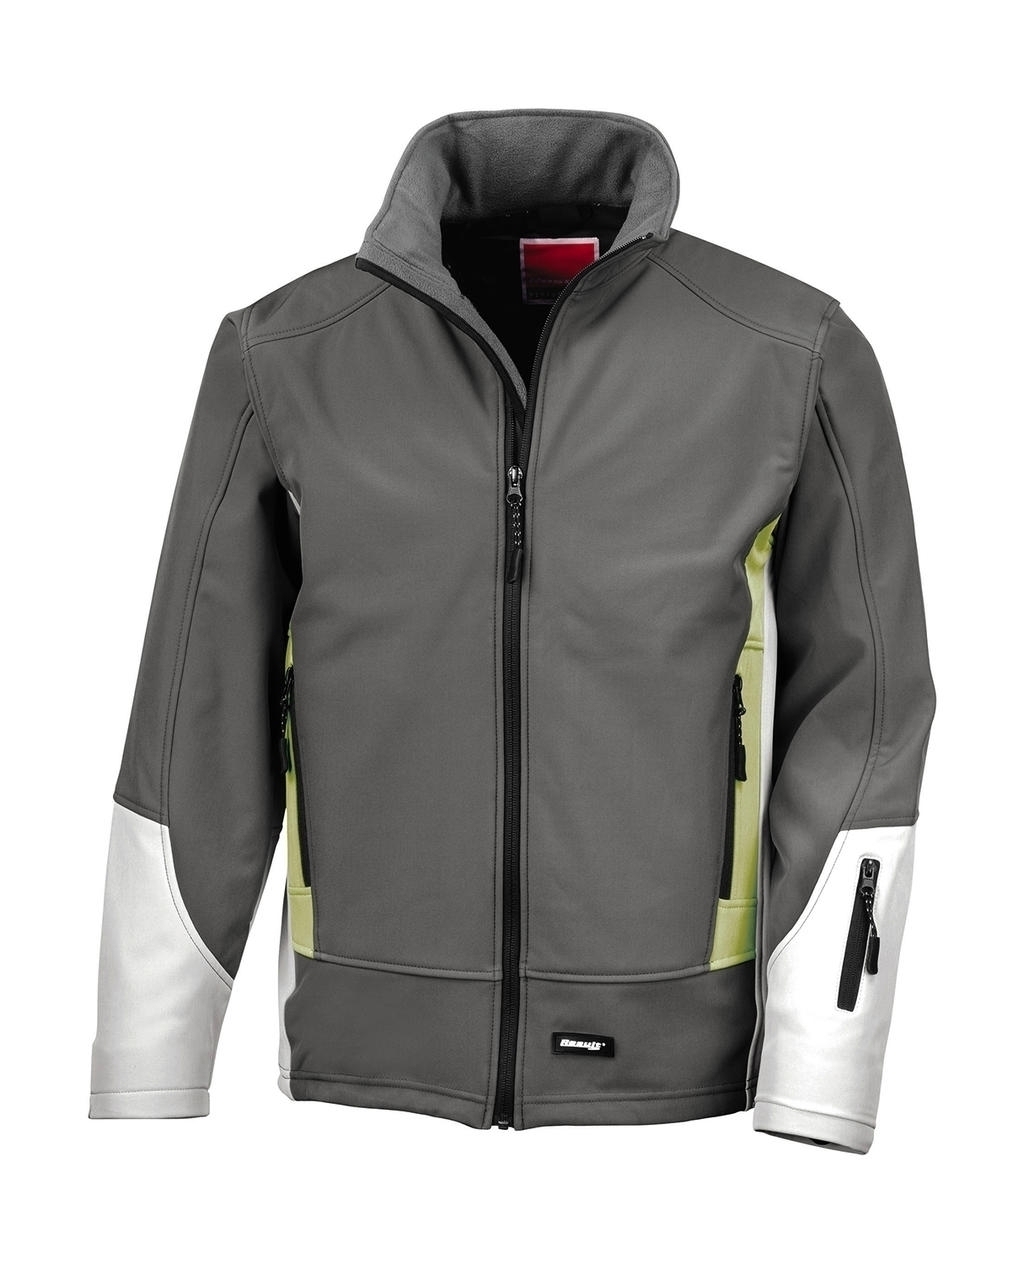 Blade Soft Shell Jacket Charcoal/Pampas/Pale Grey Gris